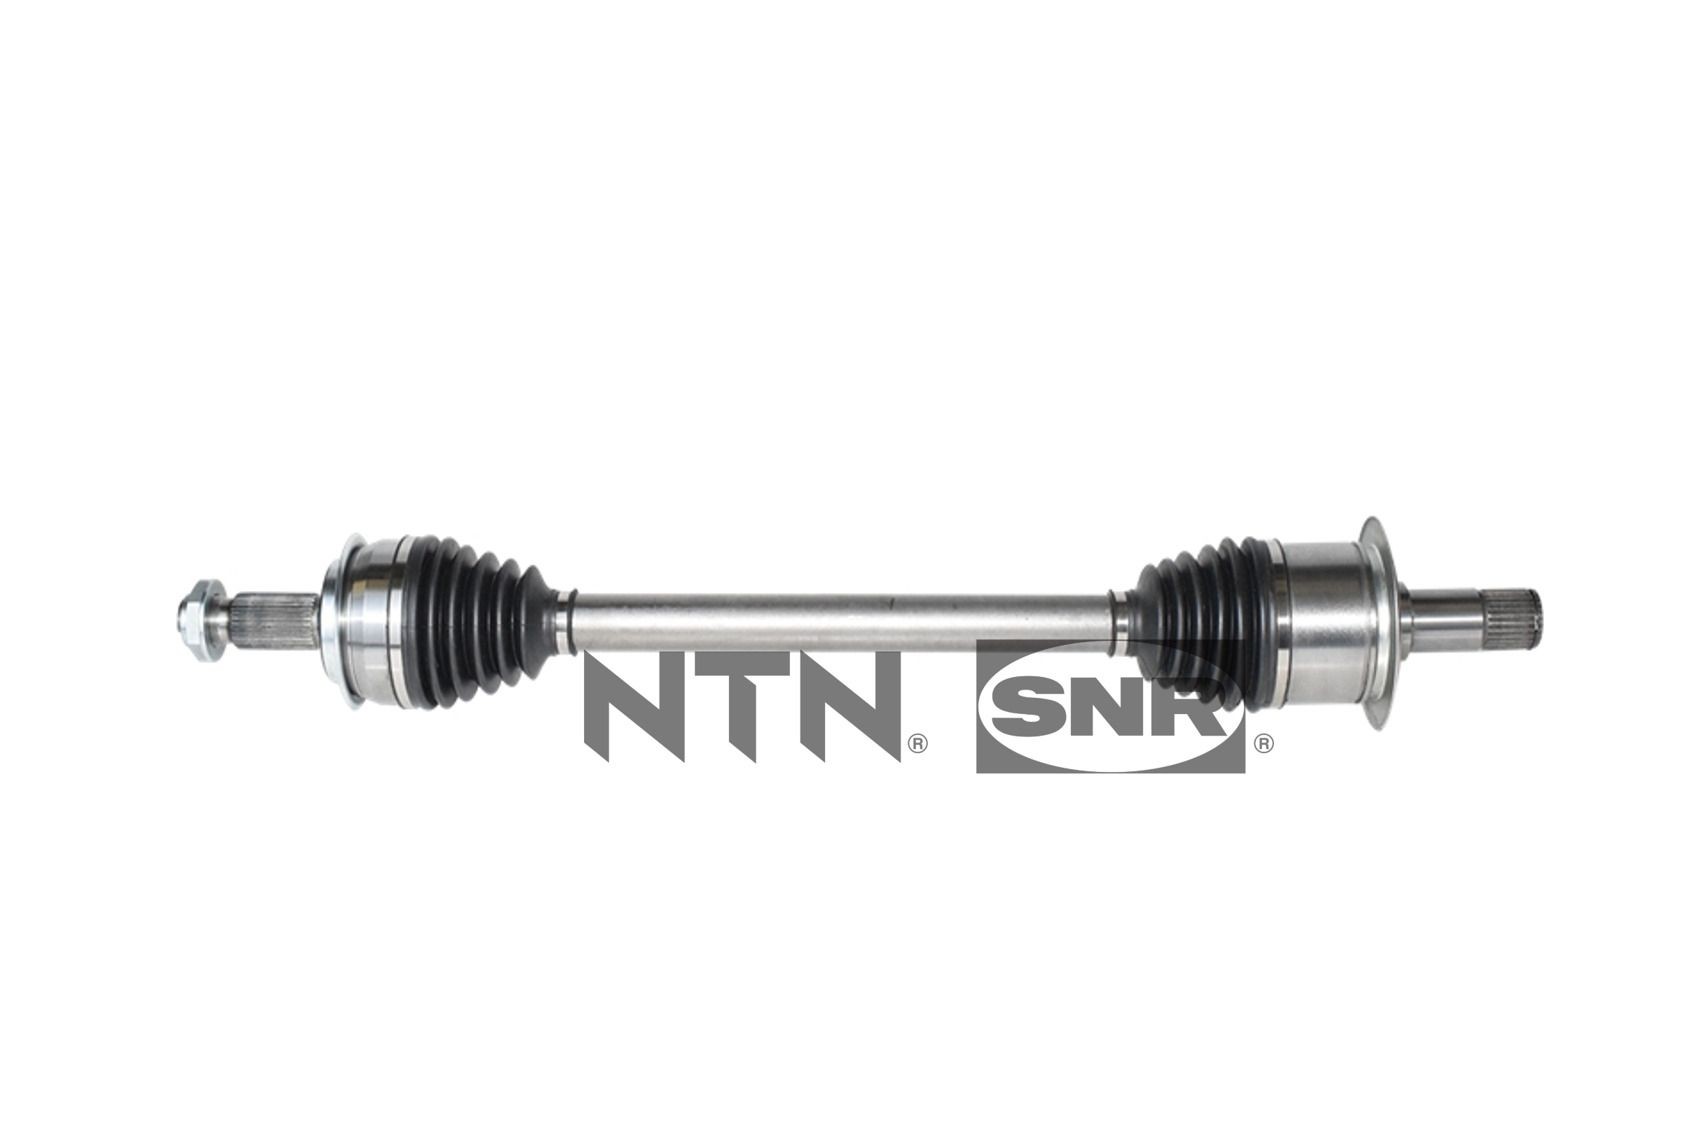 Mercedes-Benz VIANO Drive shaft and cv joint parts - Drive shaft SNR DK51.001